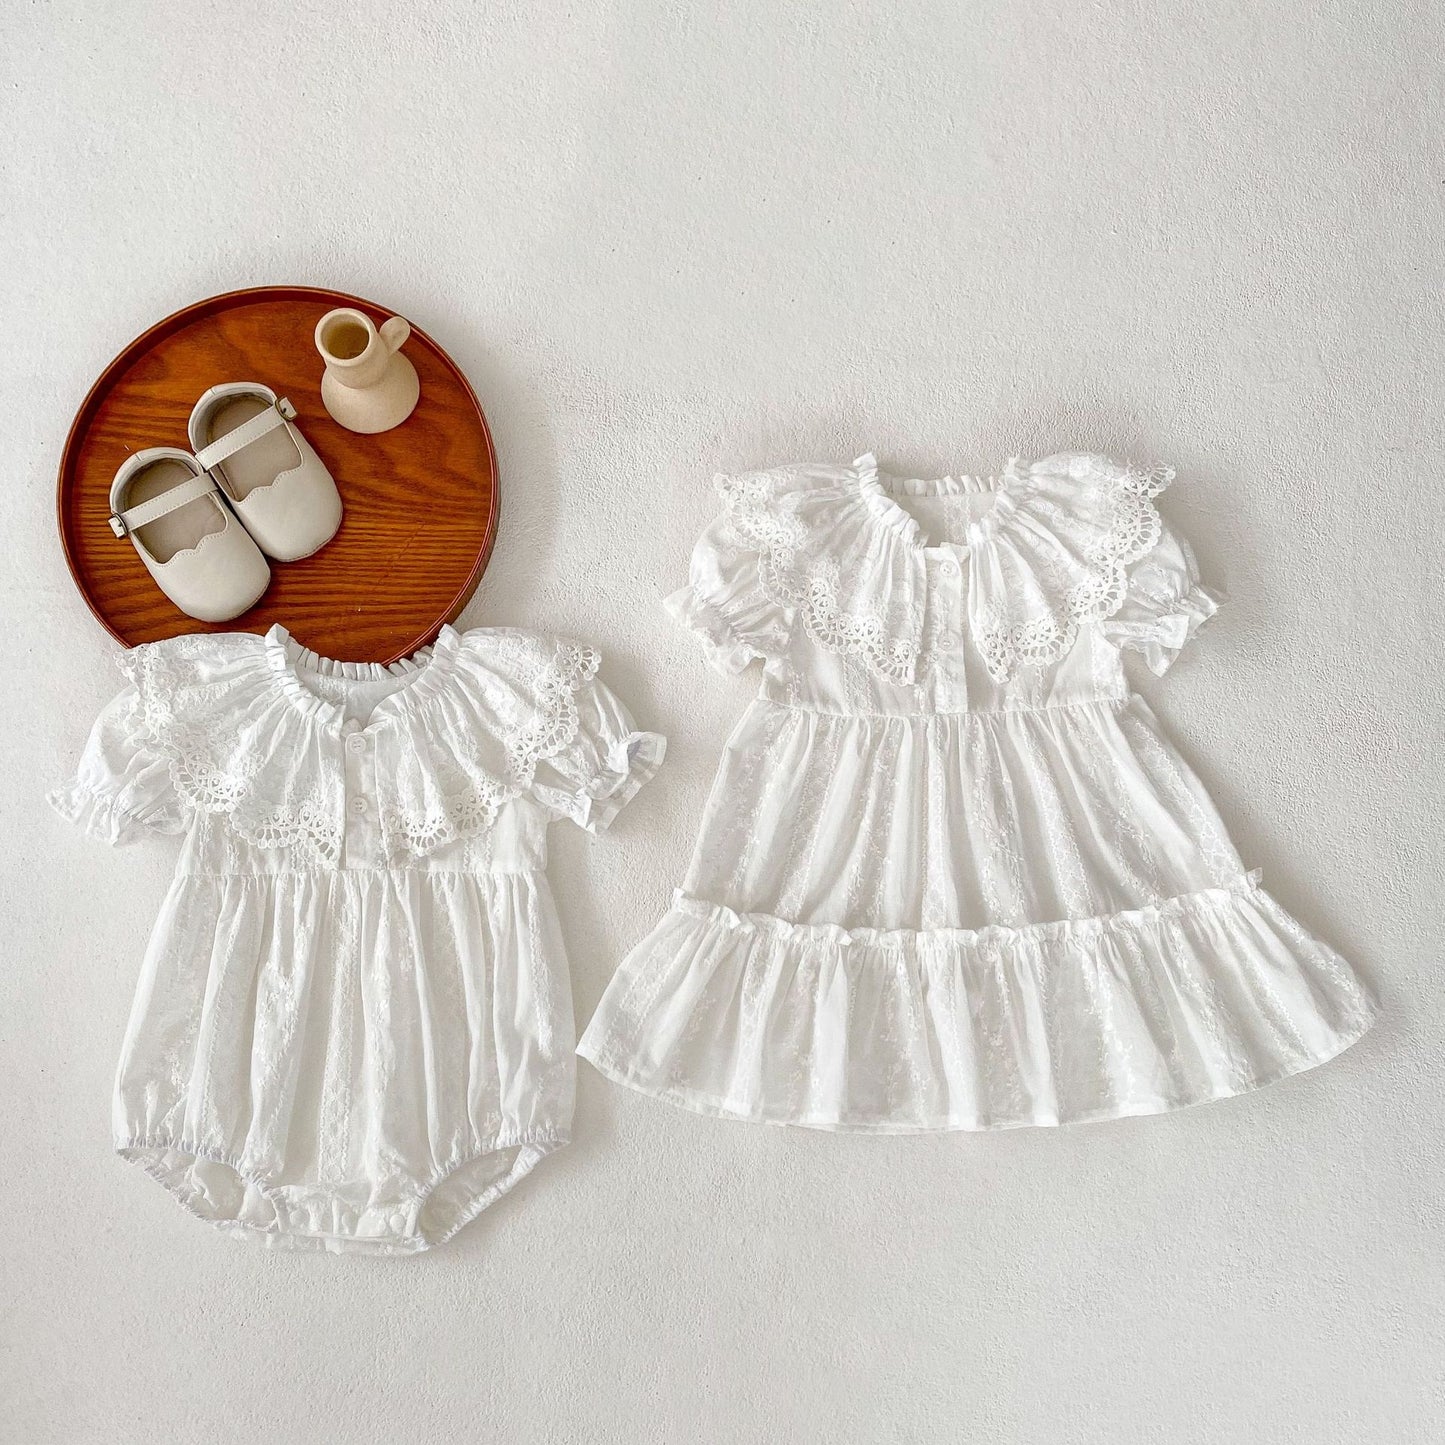 New Arrival Summer Baby Kids Girls Hollow Out Collar Short Sleeves Solid Color Floral Embroidery Onesies And Dress – Princess Sister Matching Set